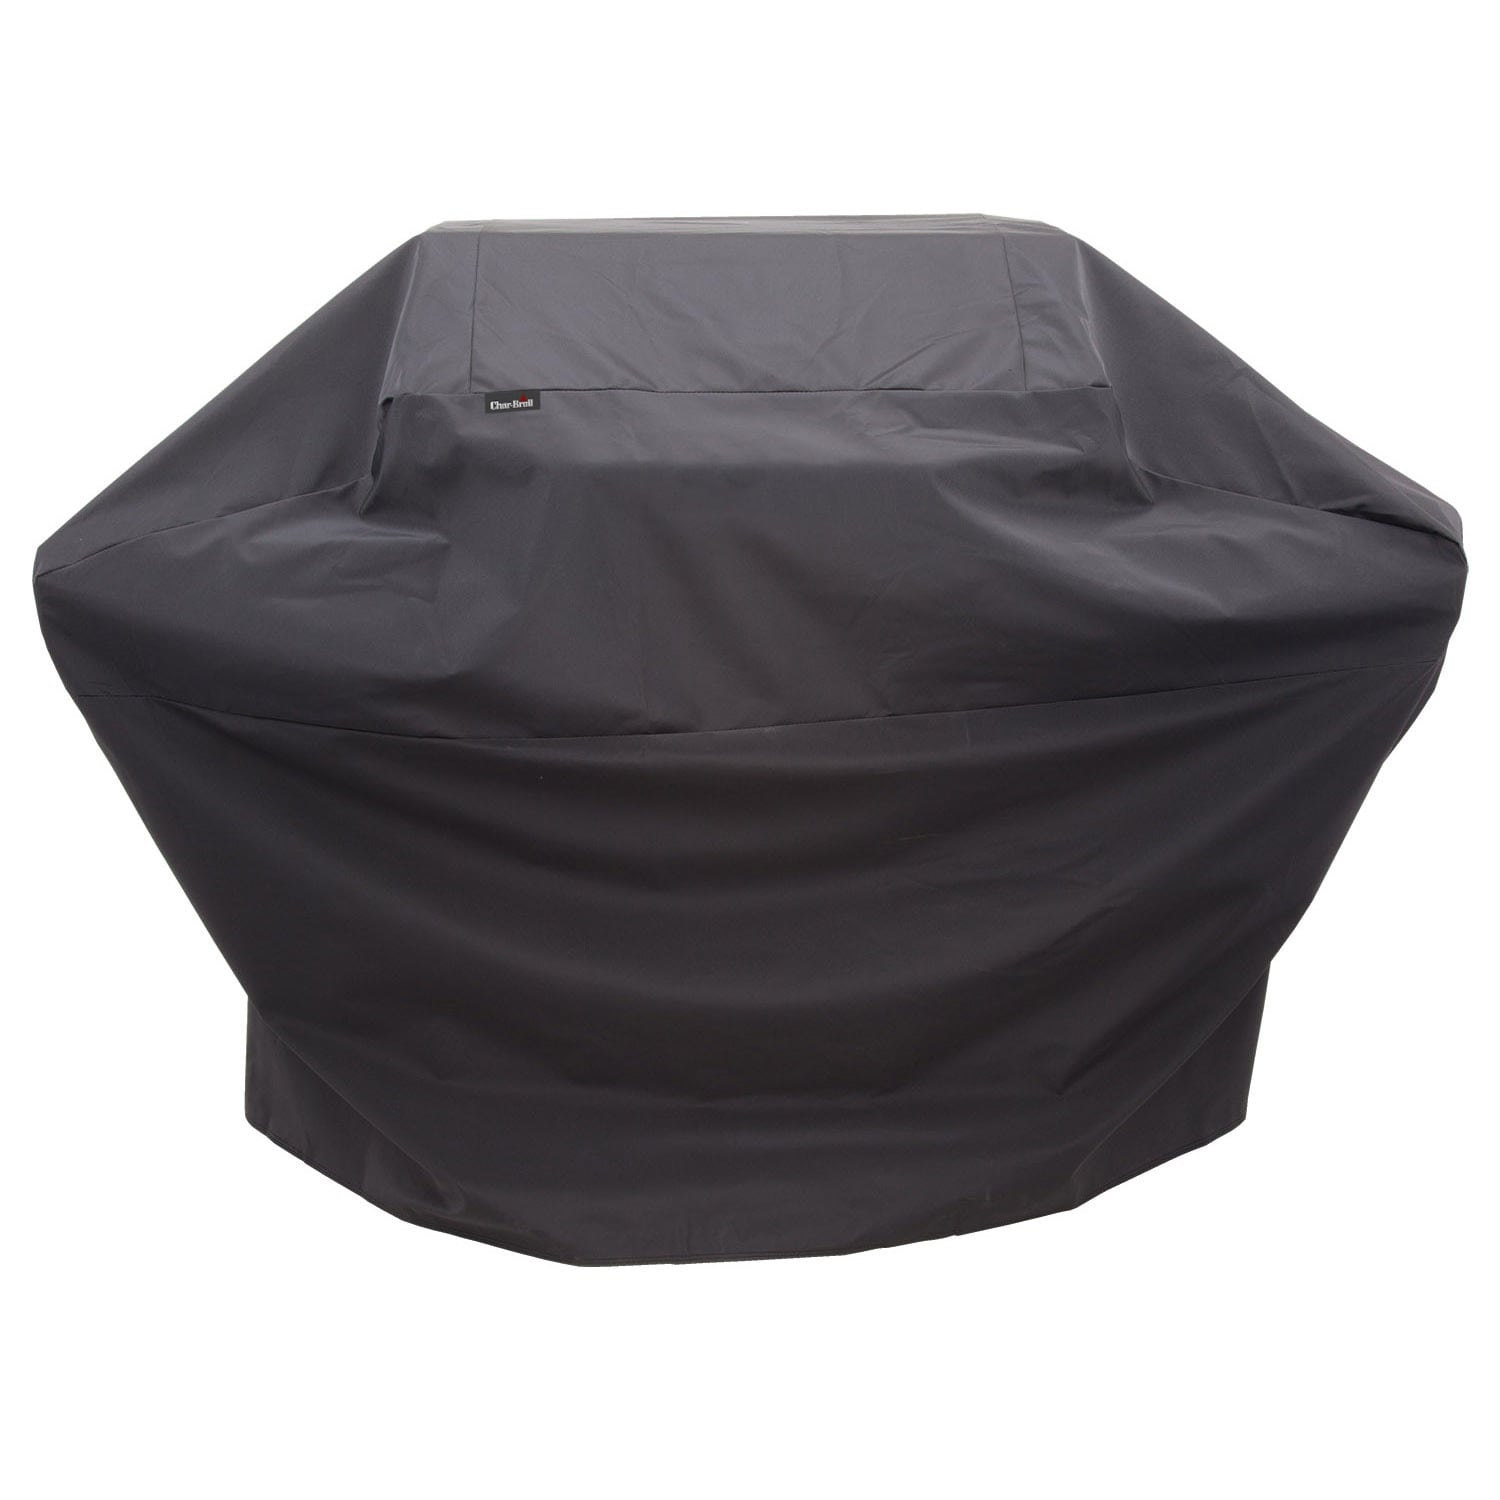 Basics Ceramic Grill Cover Extra Large 